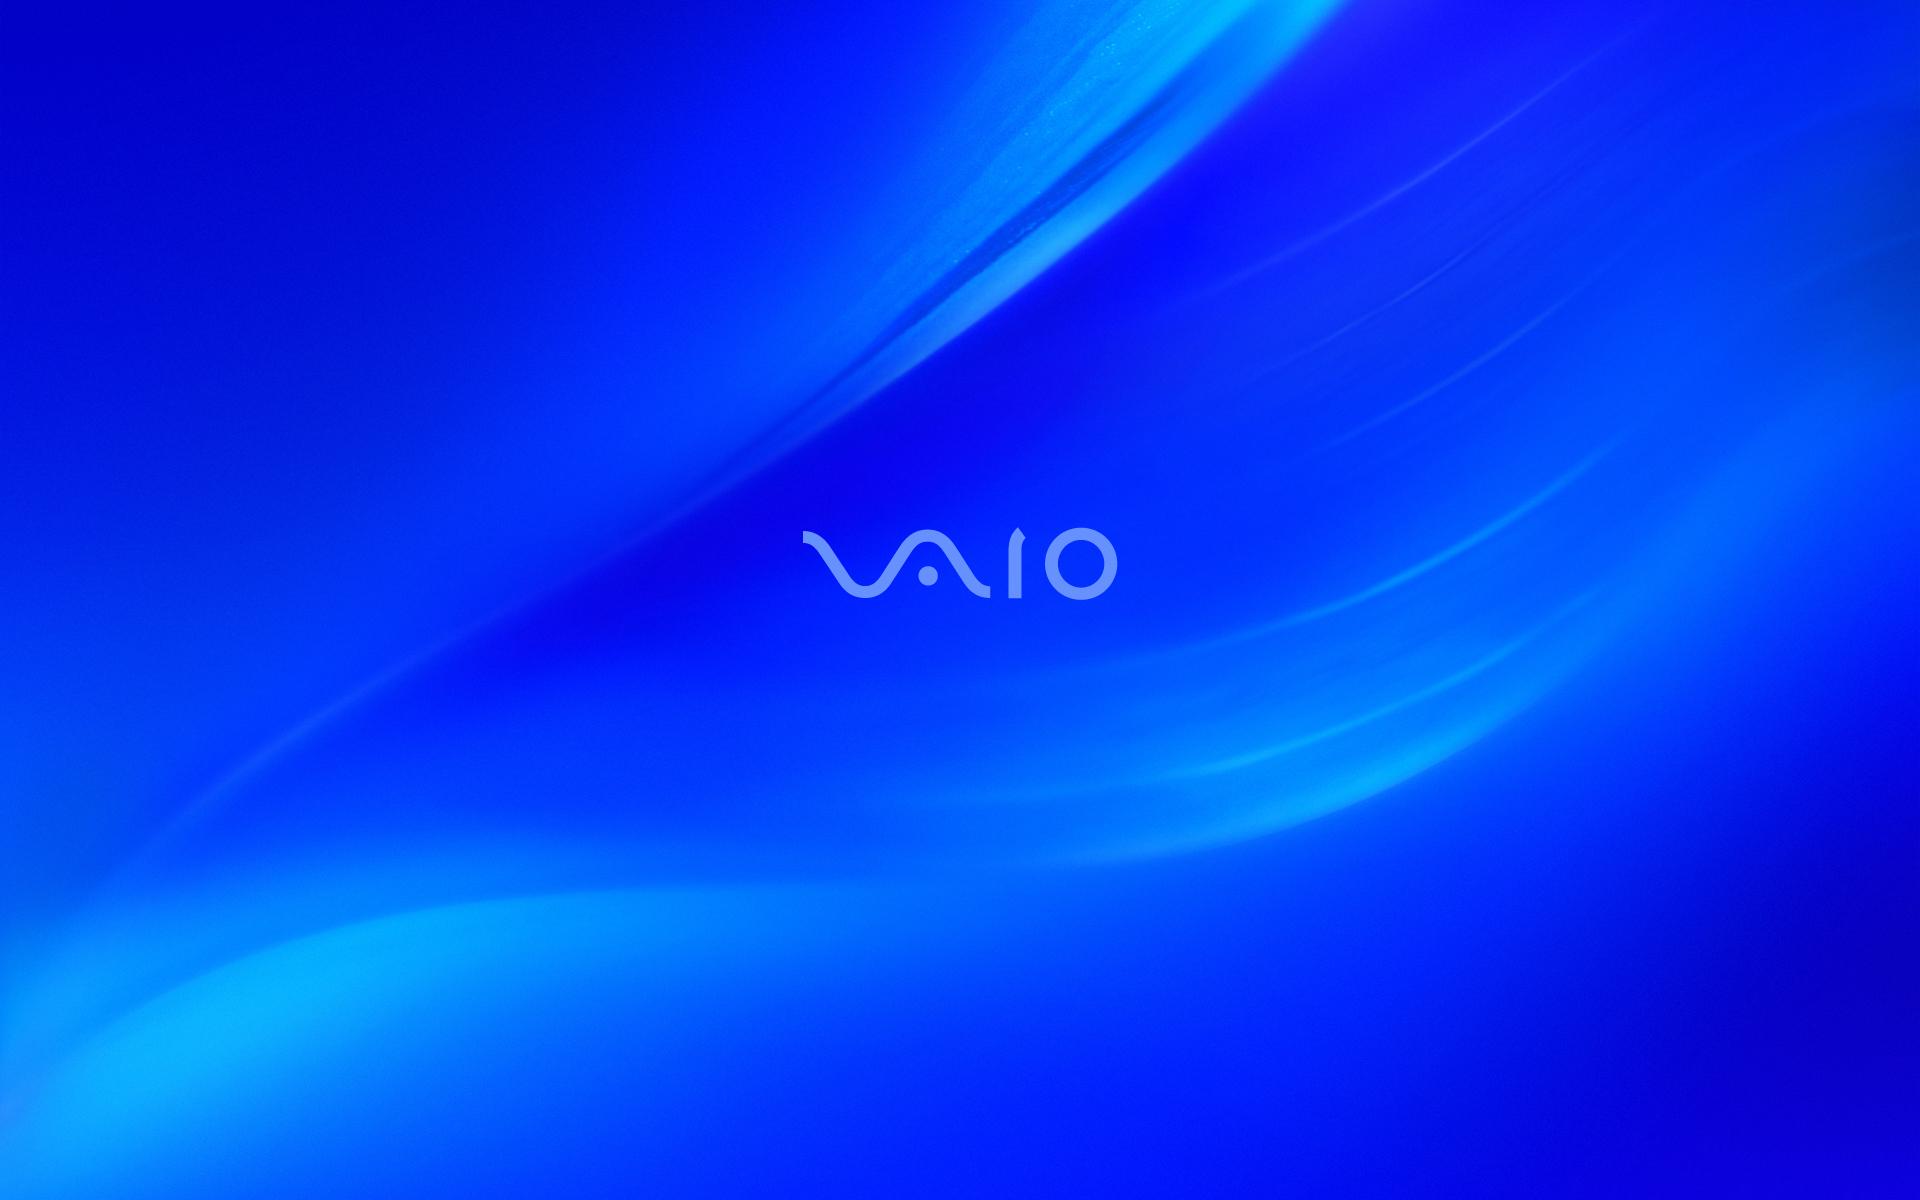 Vaio Laptops Hp Sony For Wallpaper 1280x1024 px Free Download